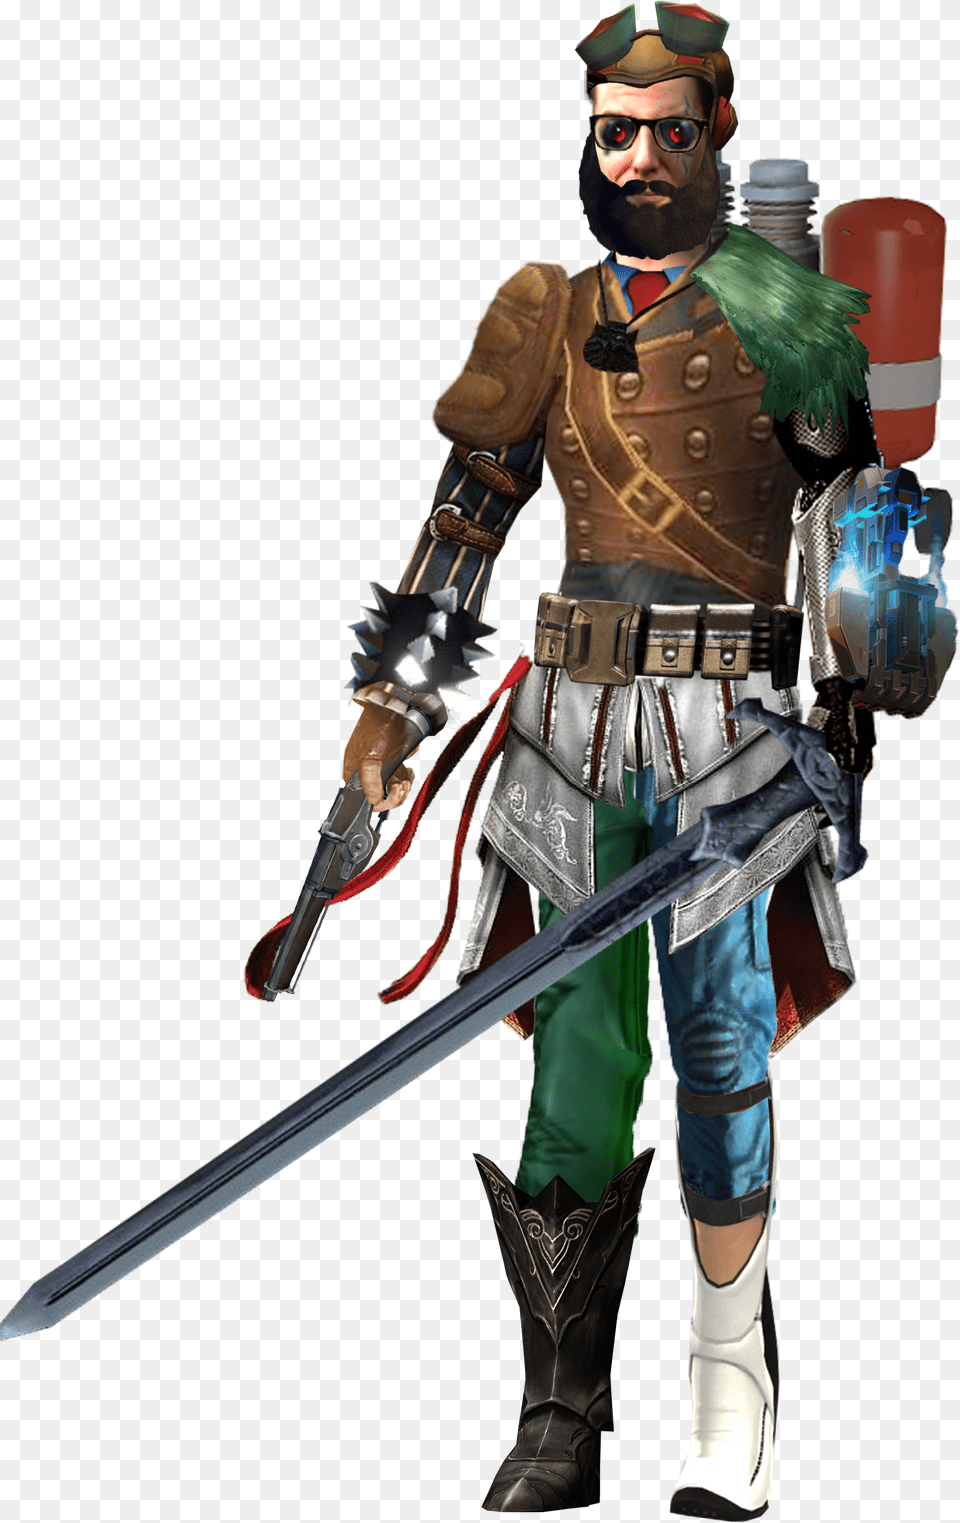 Creed, Weapon, Sword, Adult, Person Png Image